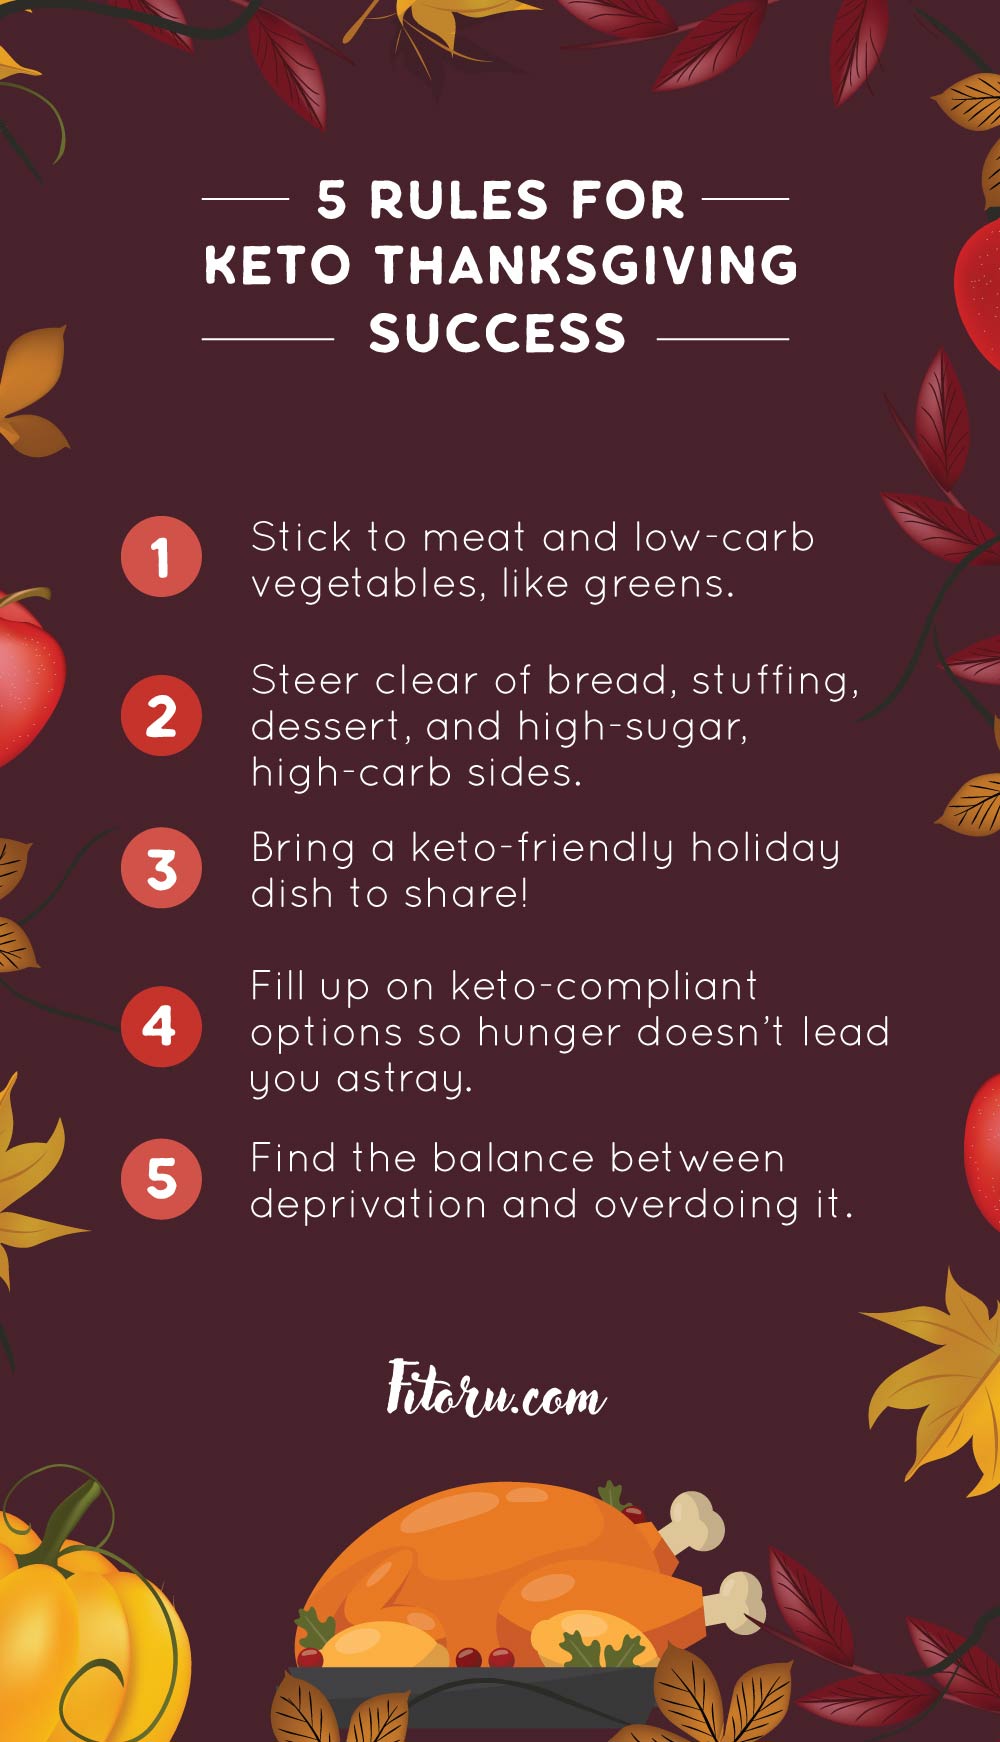 Here are 5 rules to follow to have a successful keto Thanksgiving!